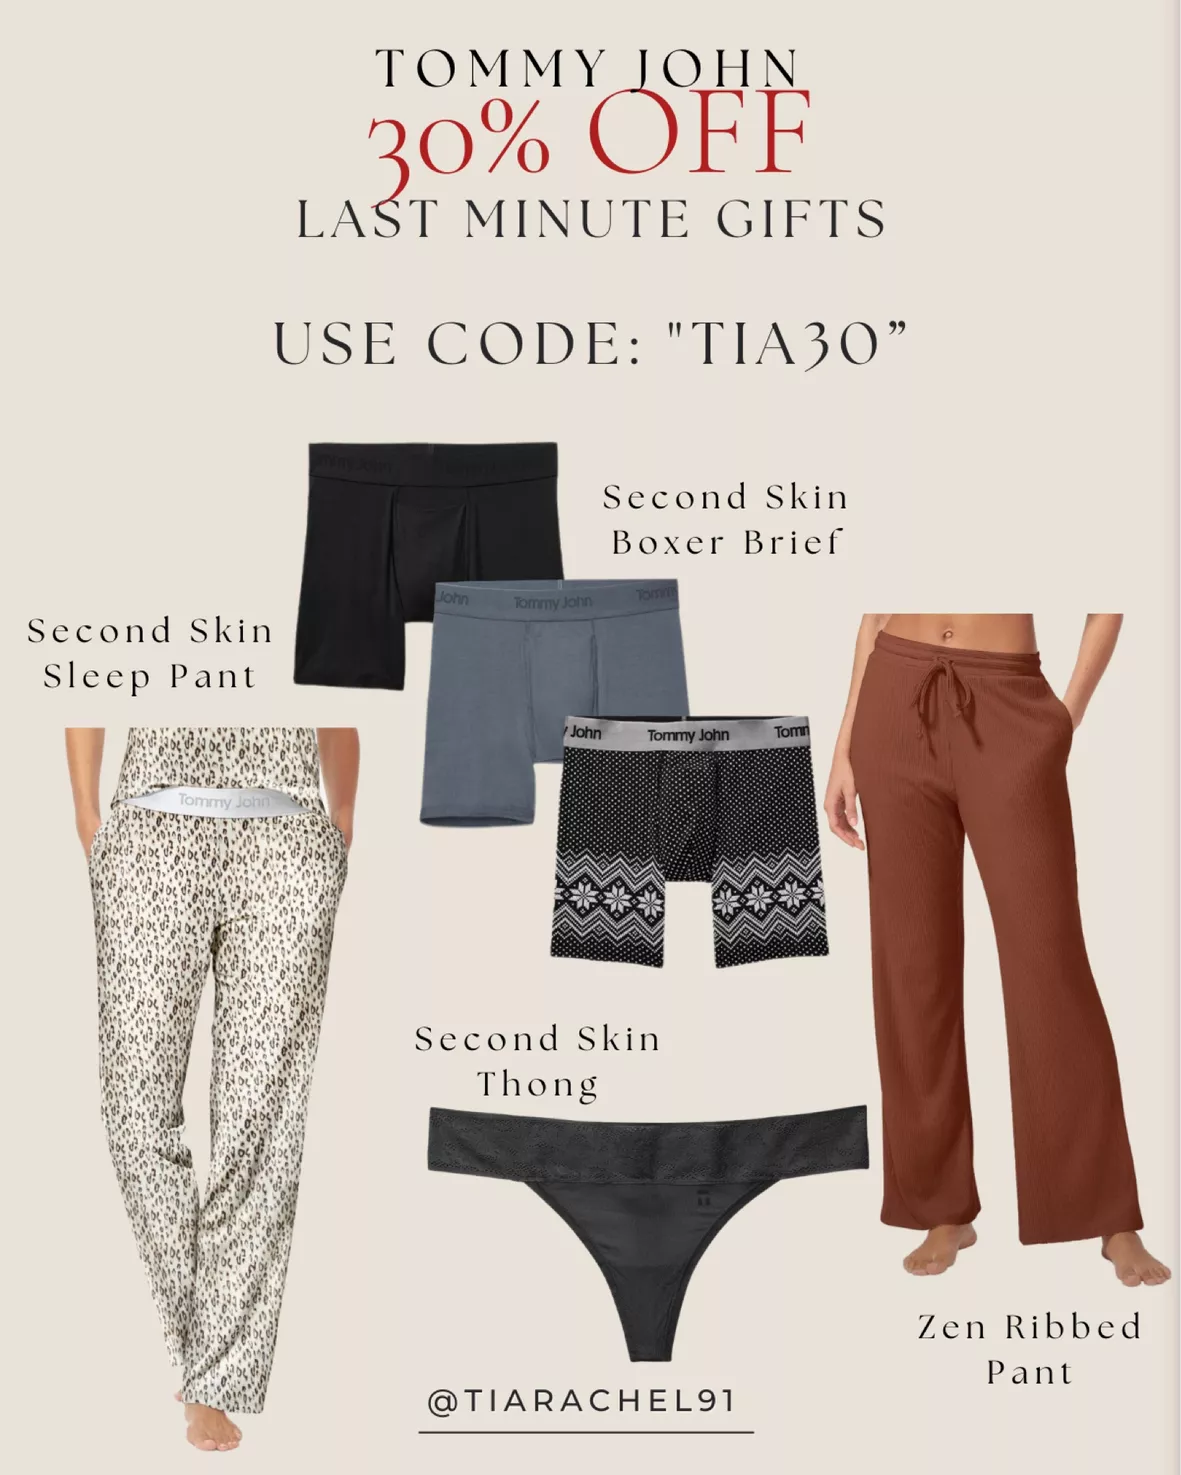 Tommy John Black Friday Sale: Save 30% on Underwear, Loungewear, and More